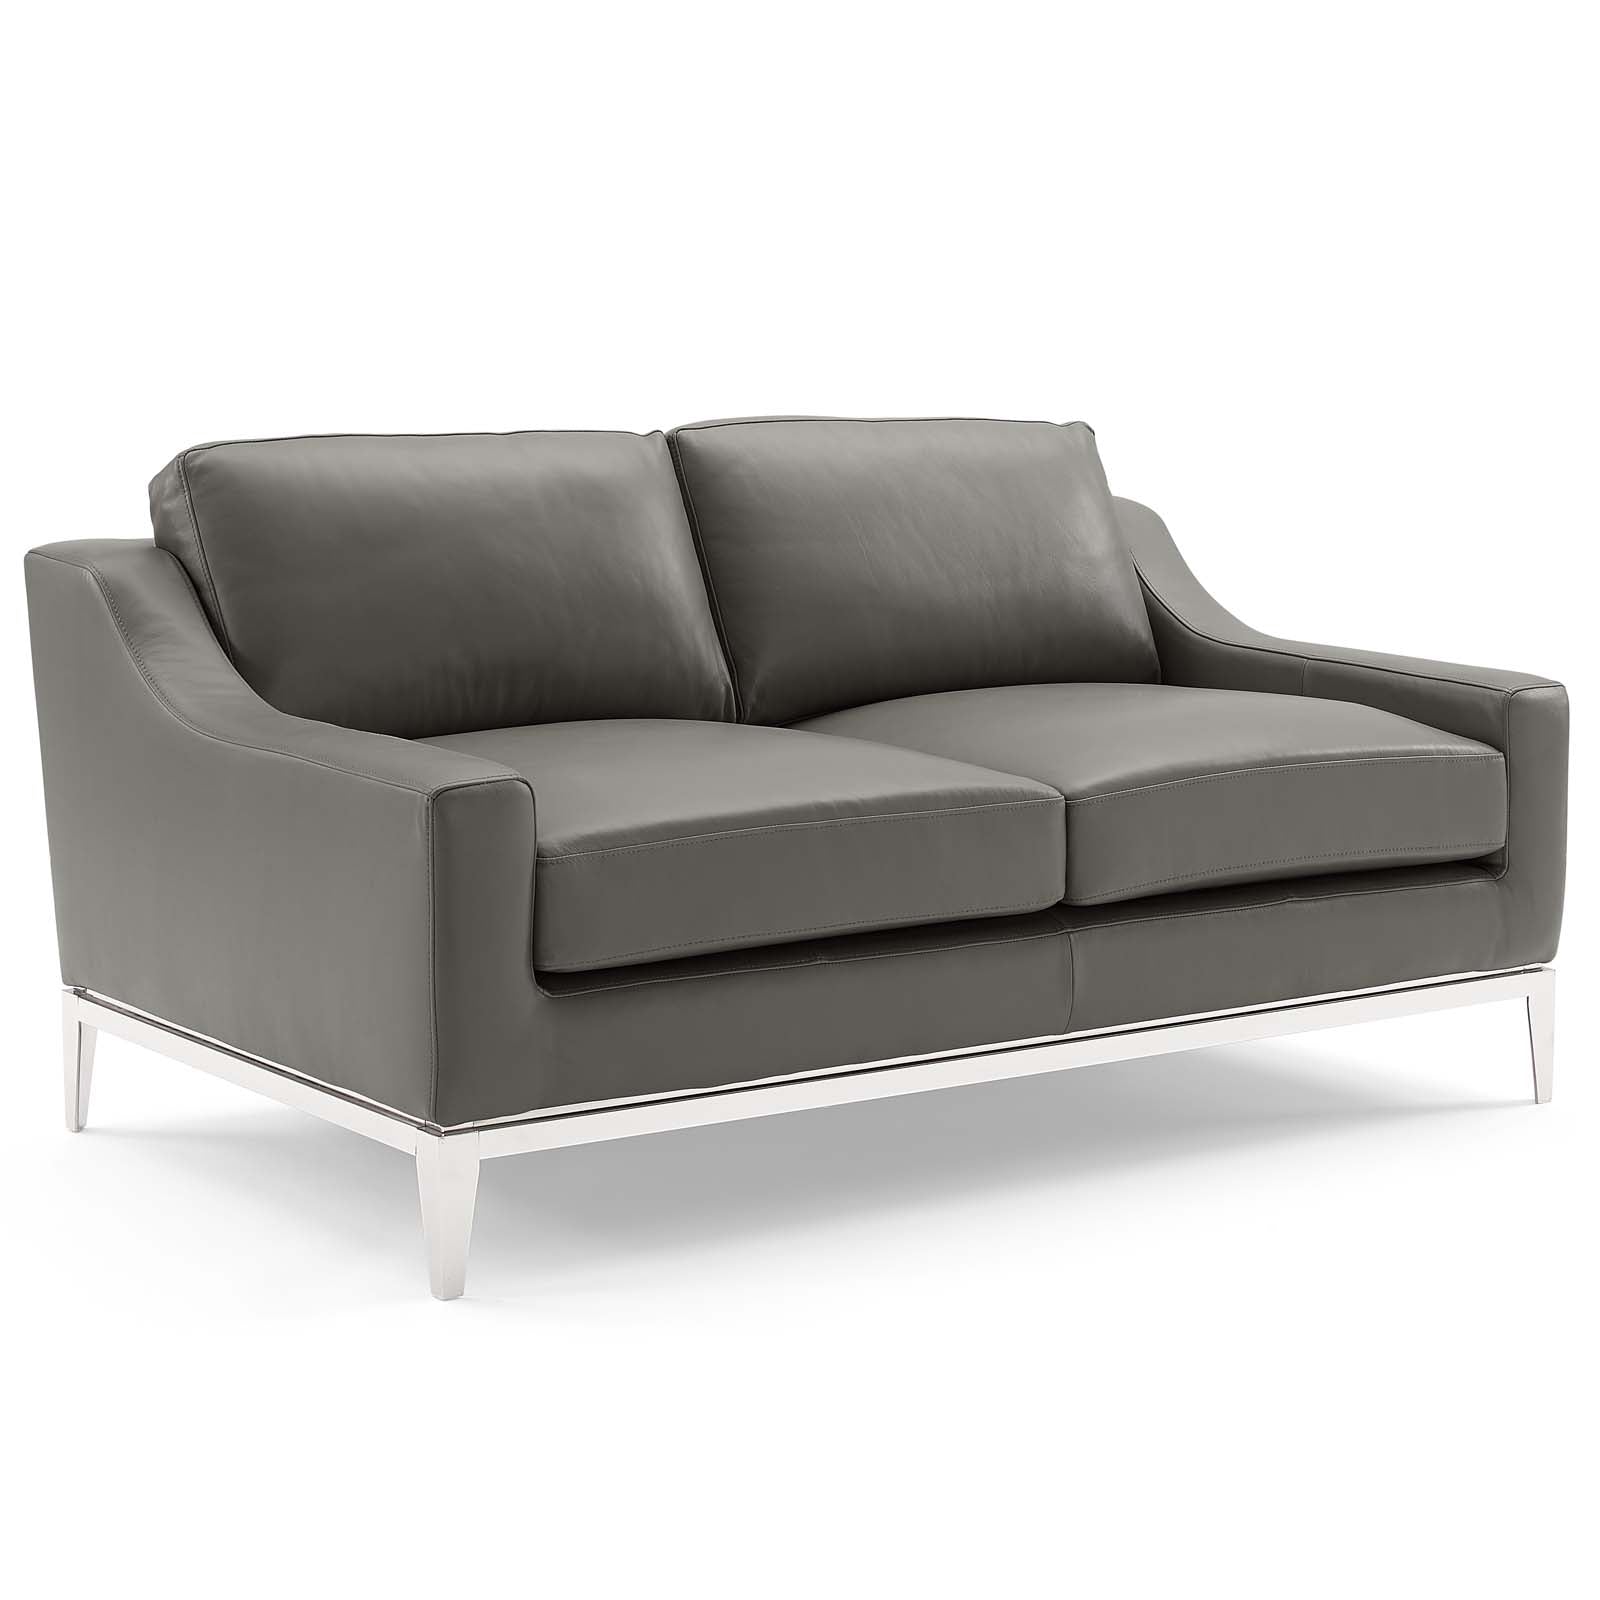 Harness Stainless Steel Base Leather Loveseat & Armchair Set - East Shore Modern Home Furnishings